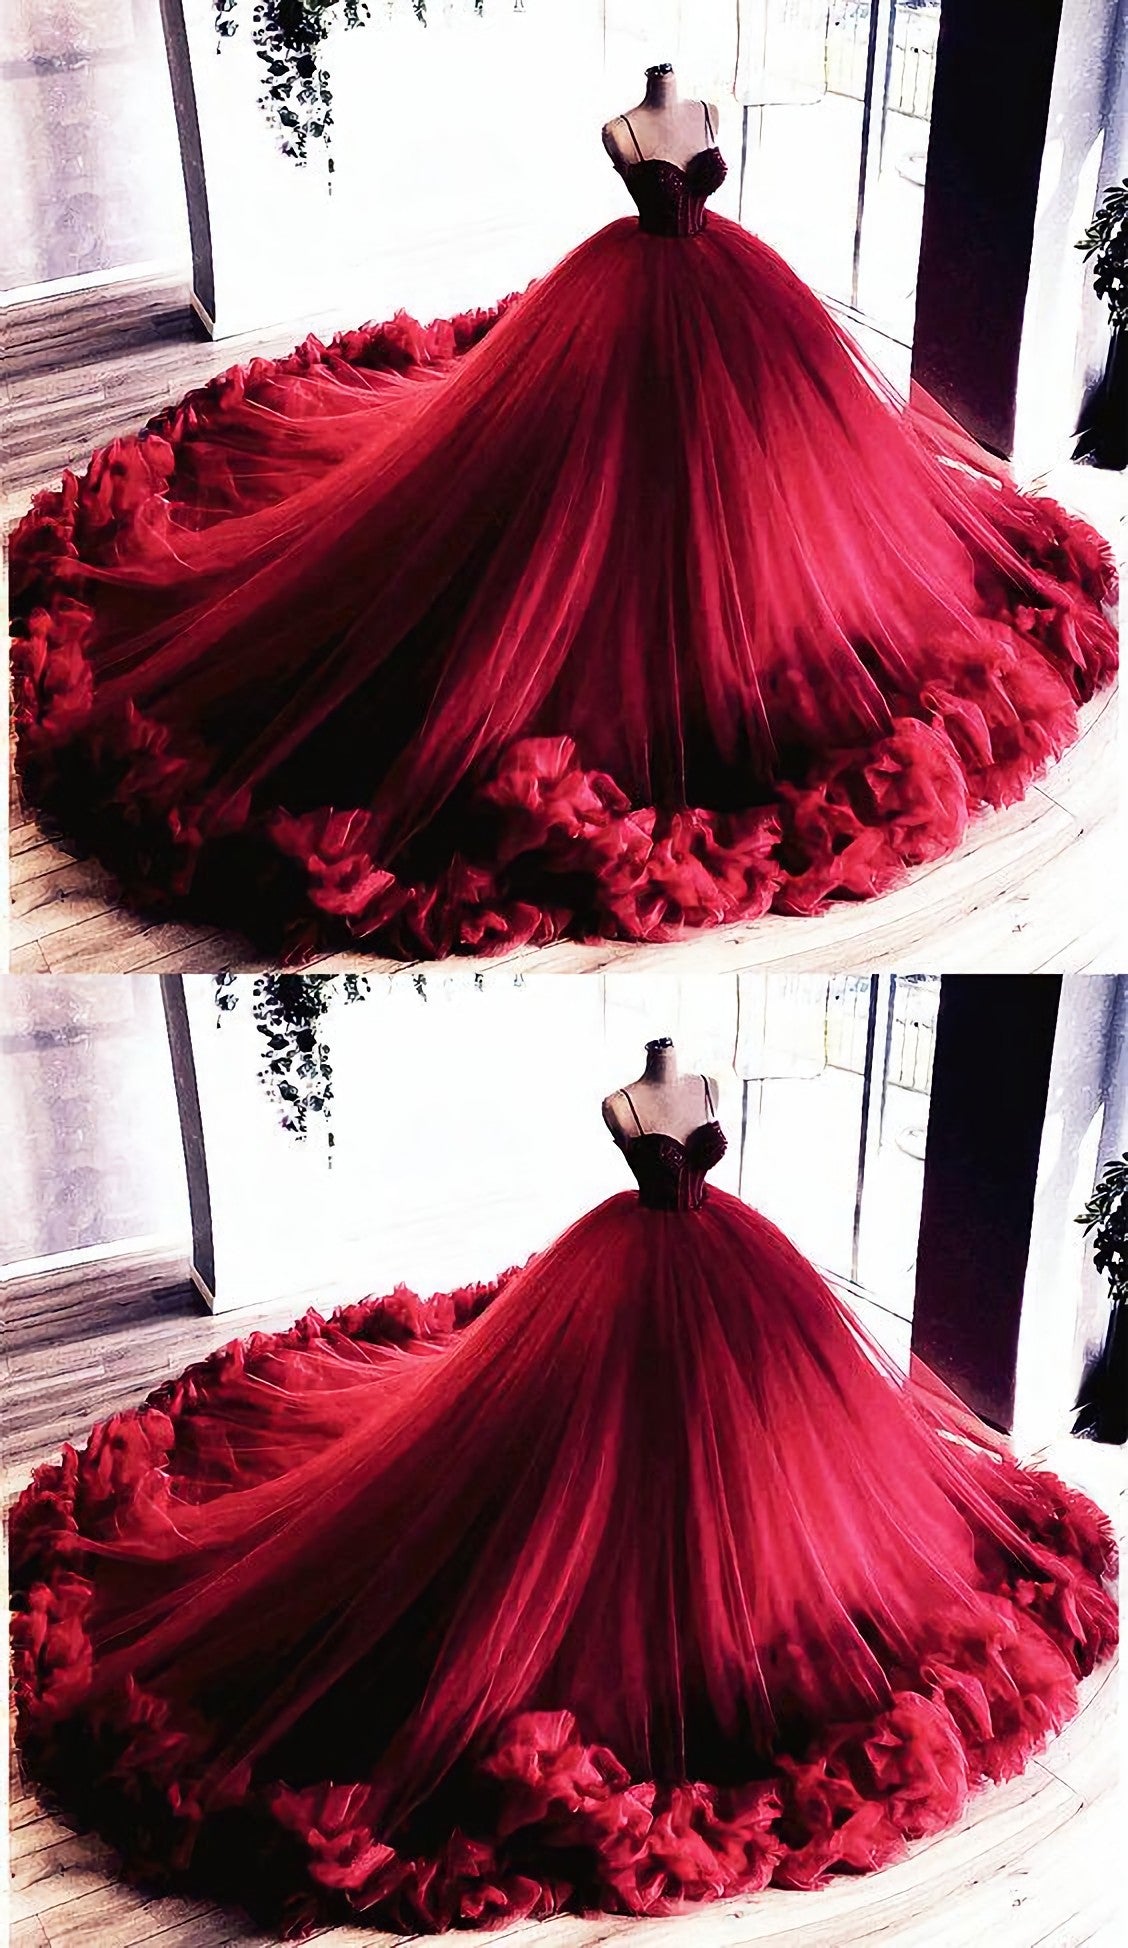 Bridesmaid Dresses Color Schemes, Burgundy Quinceanera Dresses, Ball Gown Prom Dress